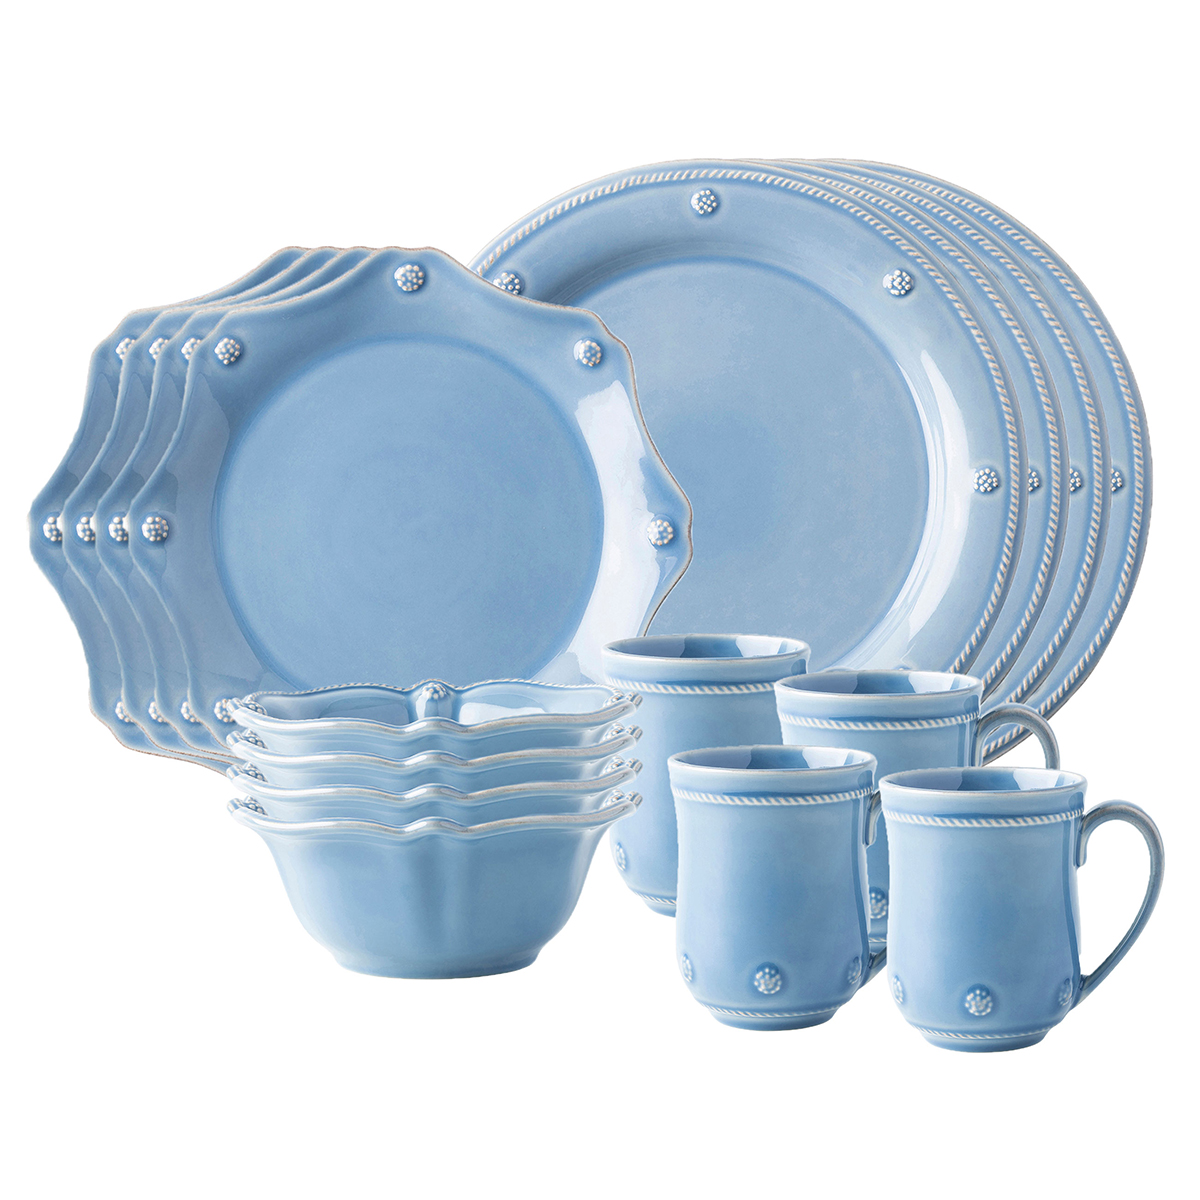 16pc set of Chambray Dishes available at Charleston home decor store GDC Home